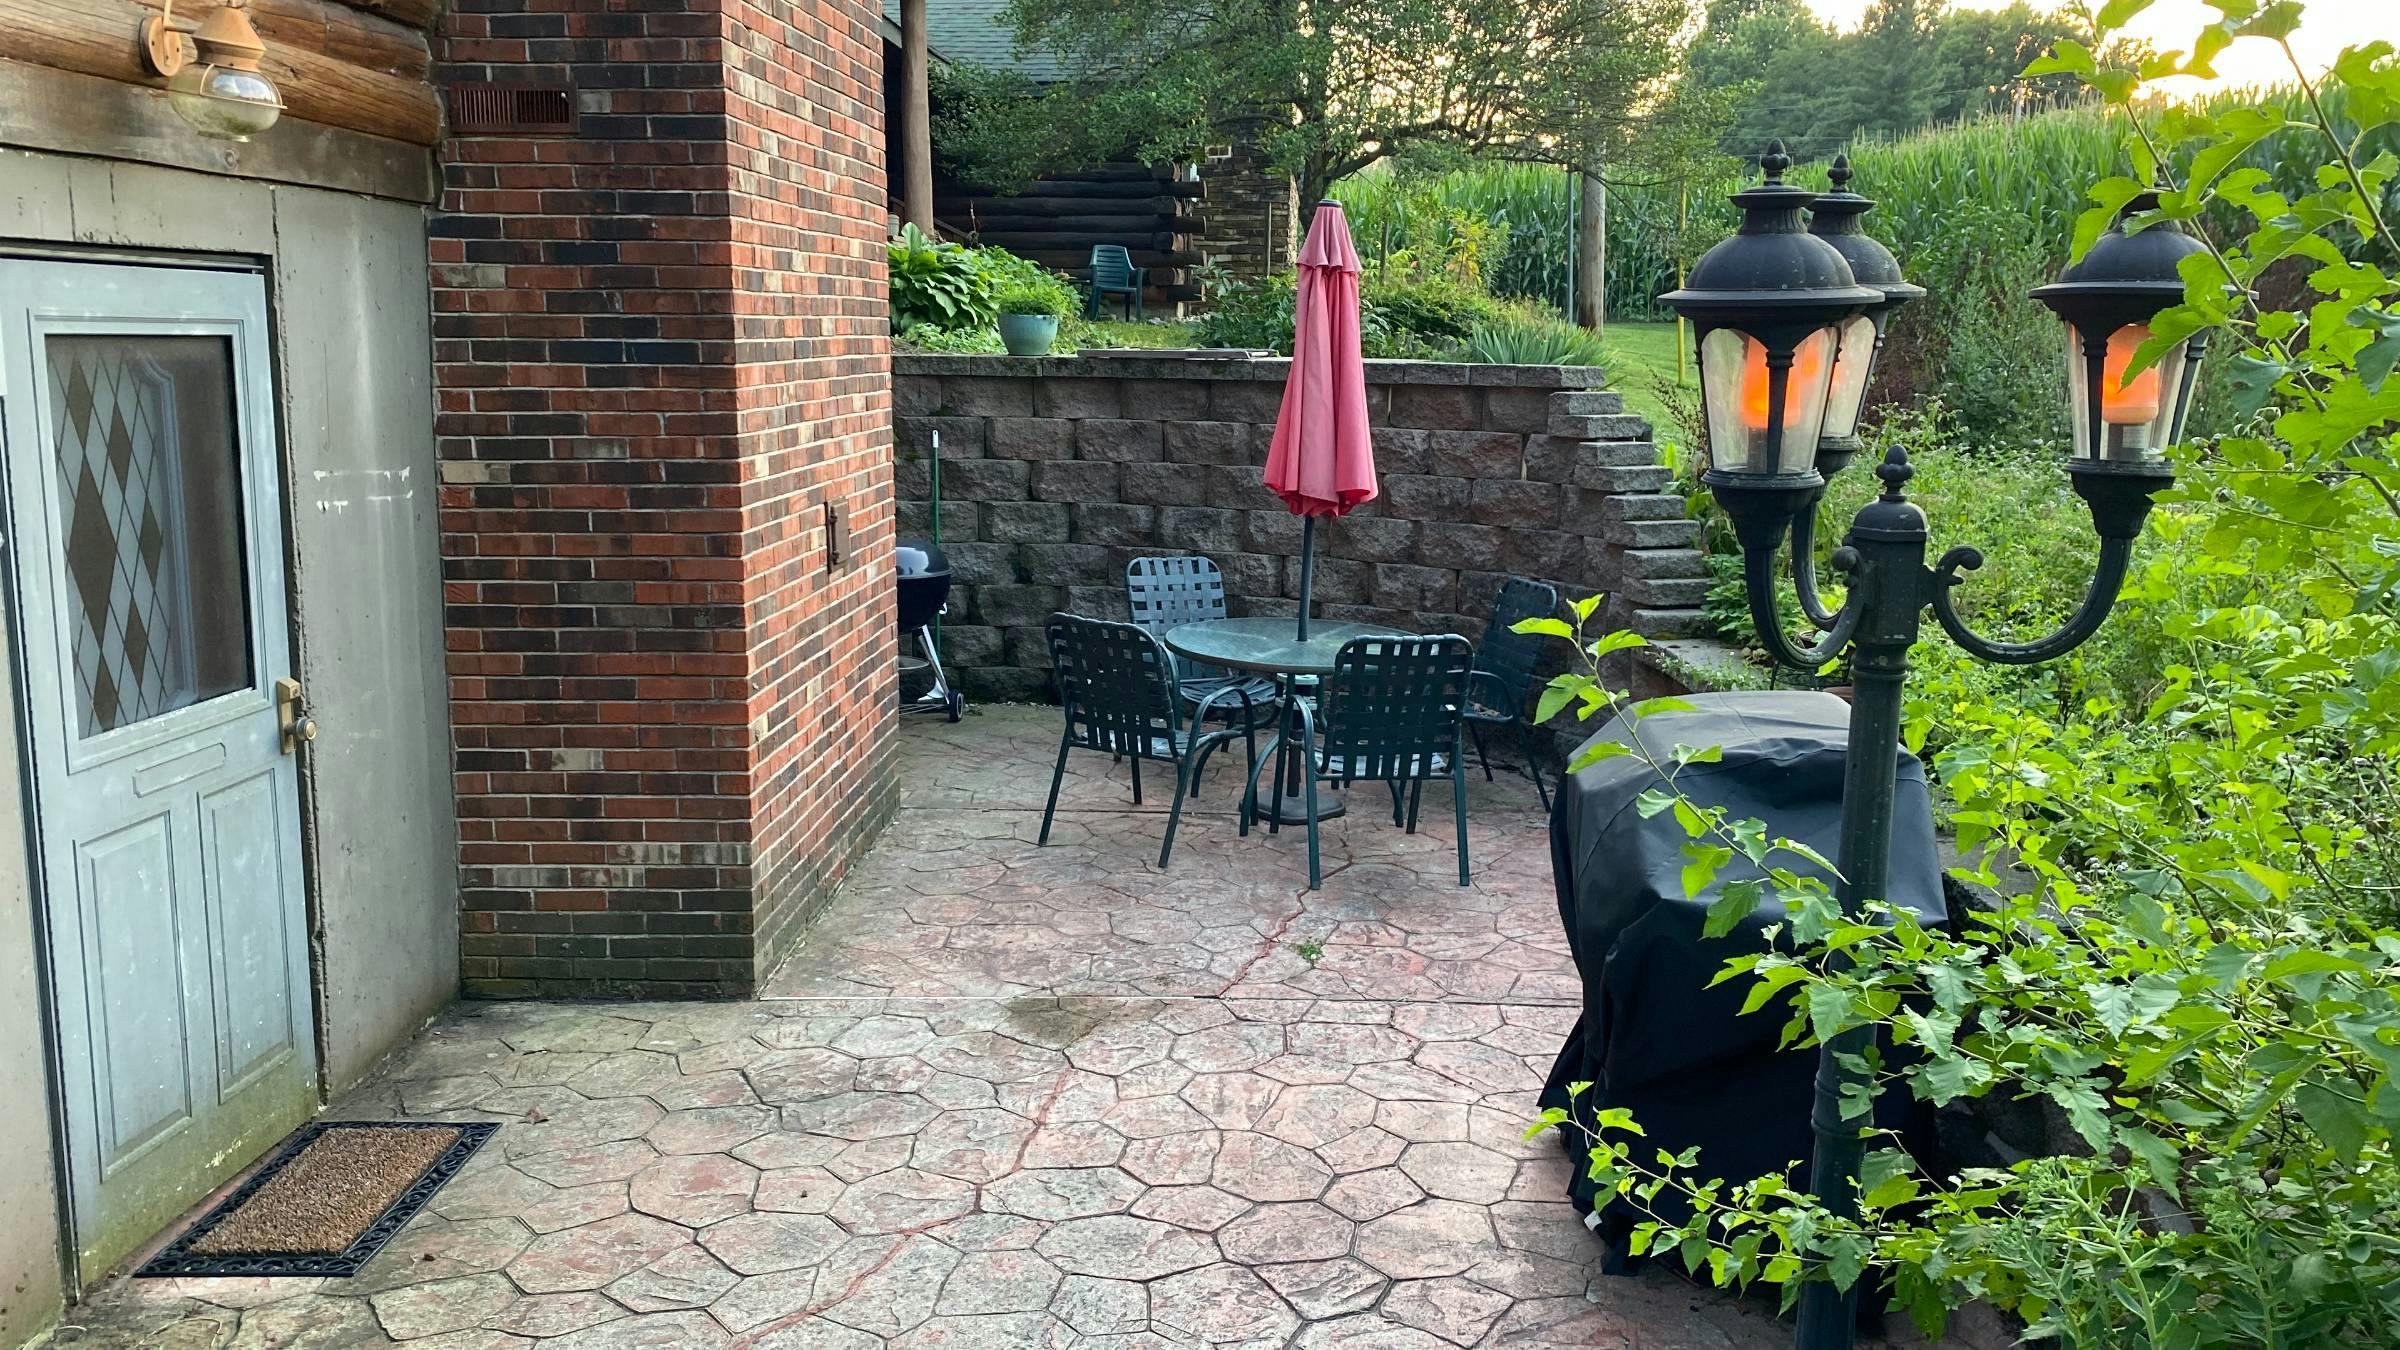 This private patio is charming and quiet.